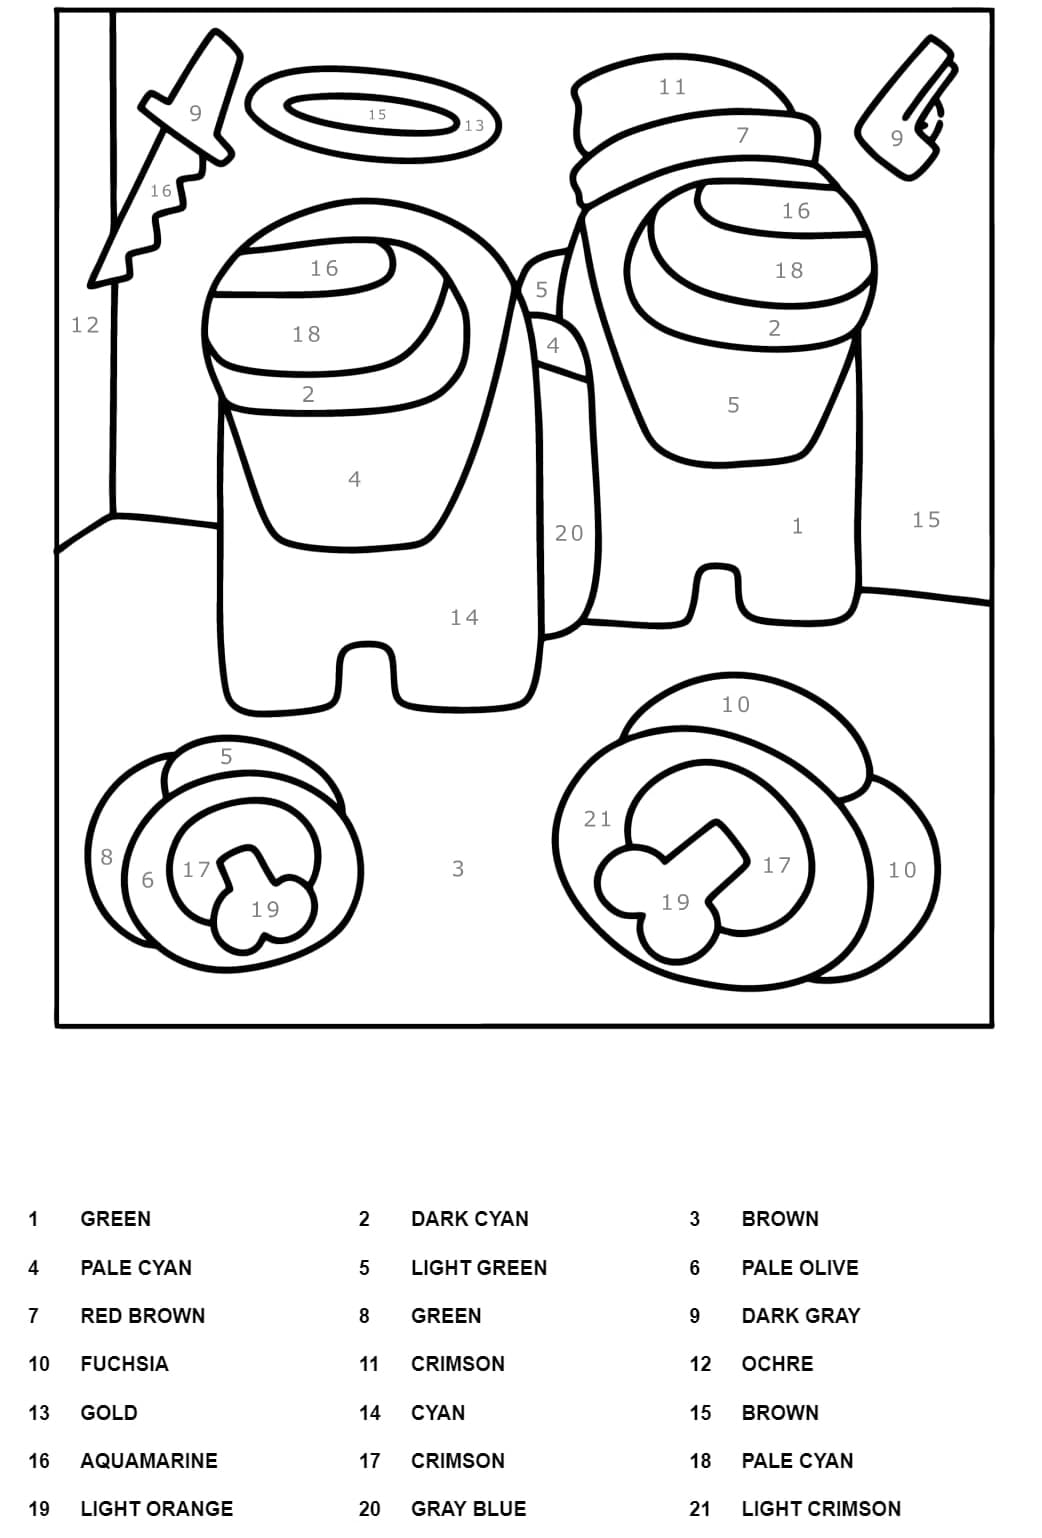 Free Among Us Color By Number Worksheet Coloring Page Free Printable Coloring Pages For Kids